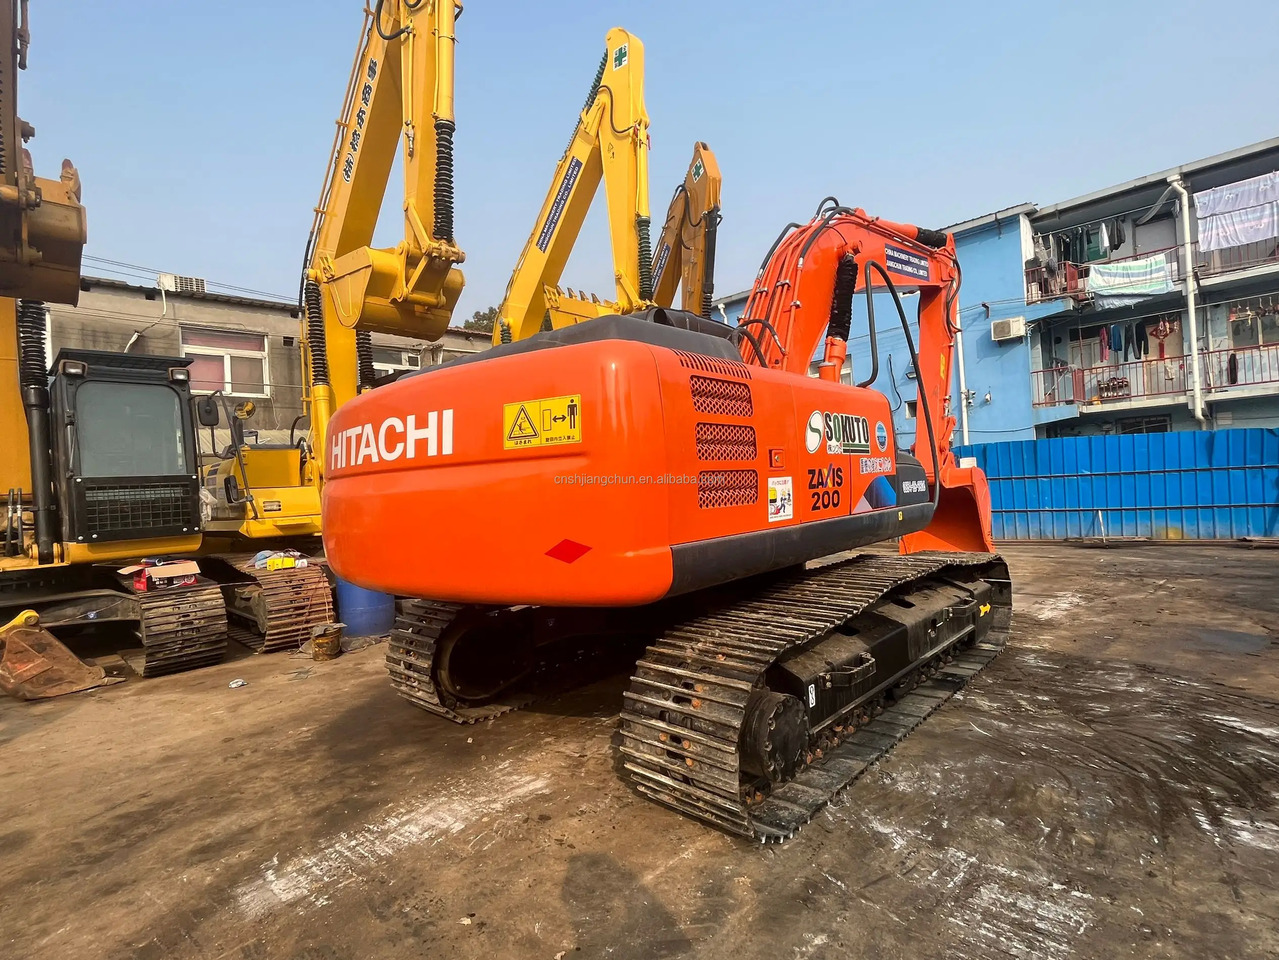 Crawler excavator Original Well-Maintained Hitachi ZX200-3 Used Excavator for Sale,Second hand hitachi zx200-3 zx200-3G excavator: picture 5